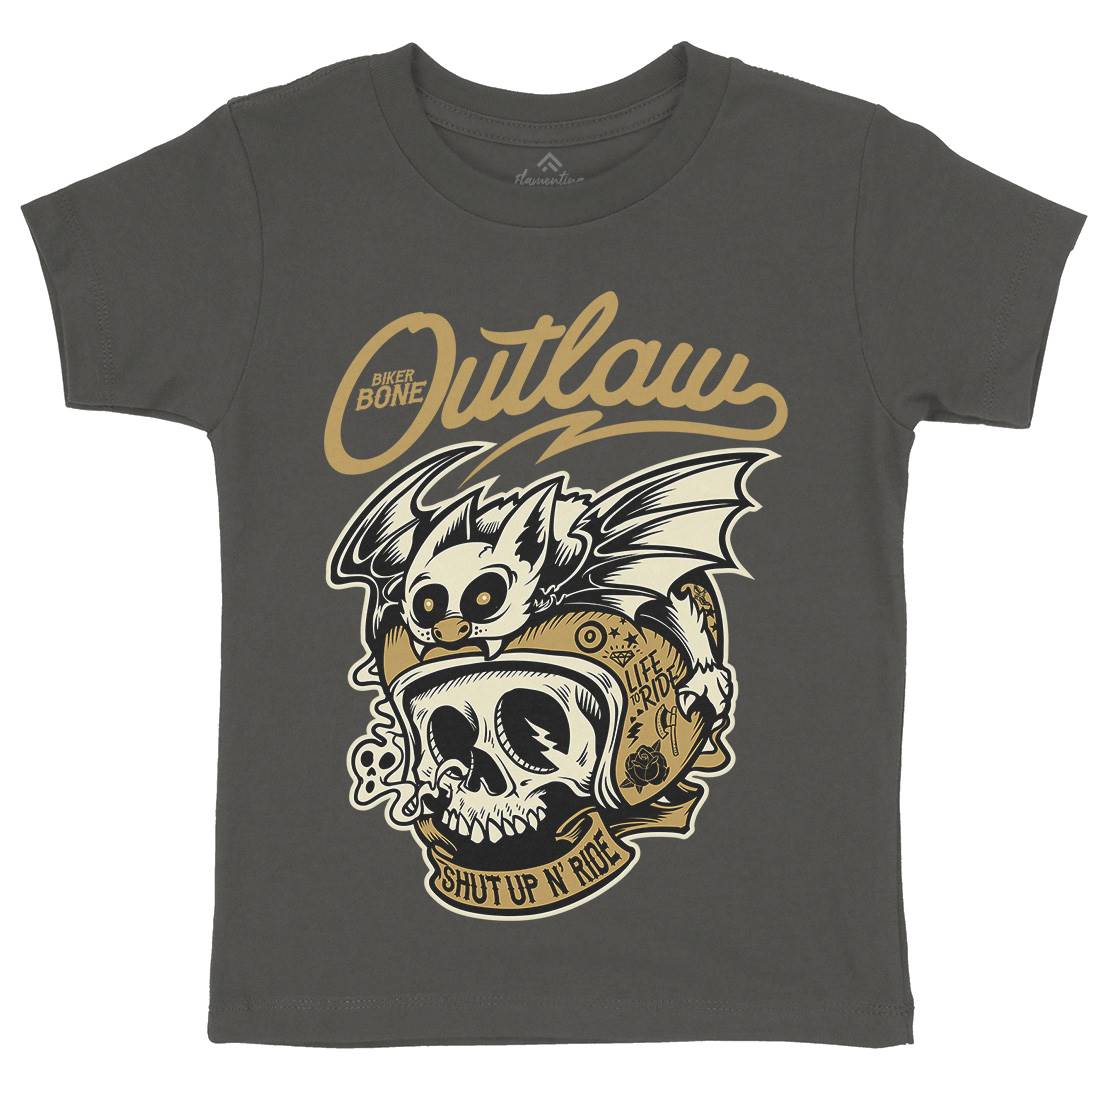 Outlaw Kids Crew Neck T-Shirt Motorcycles D063